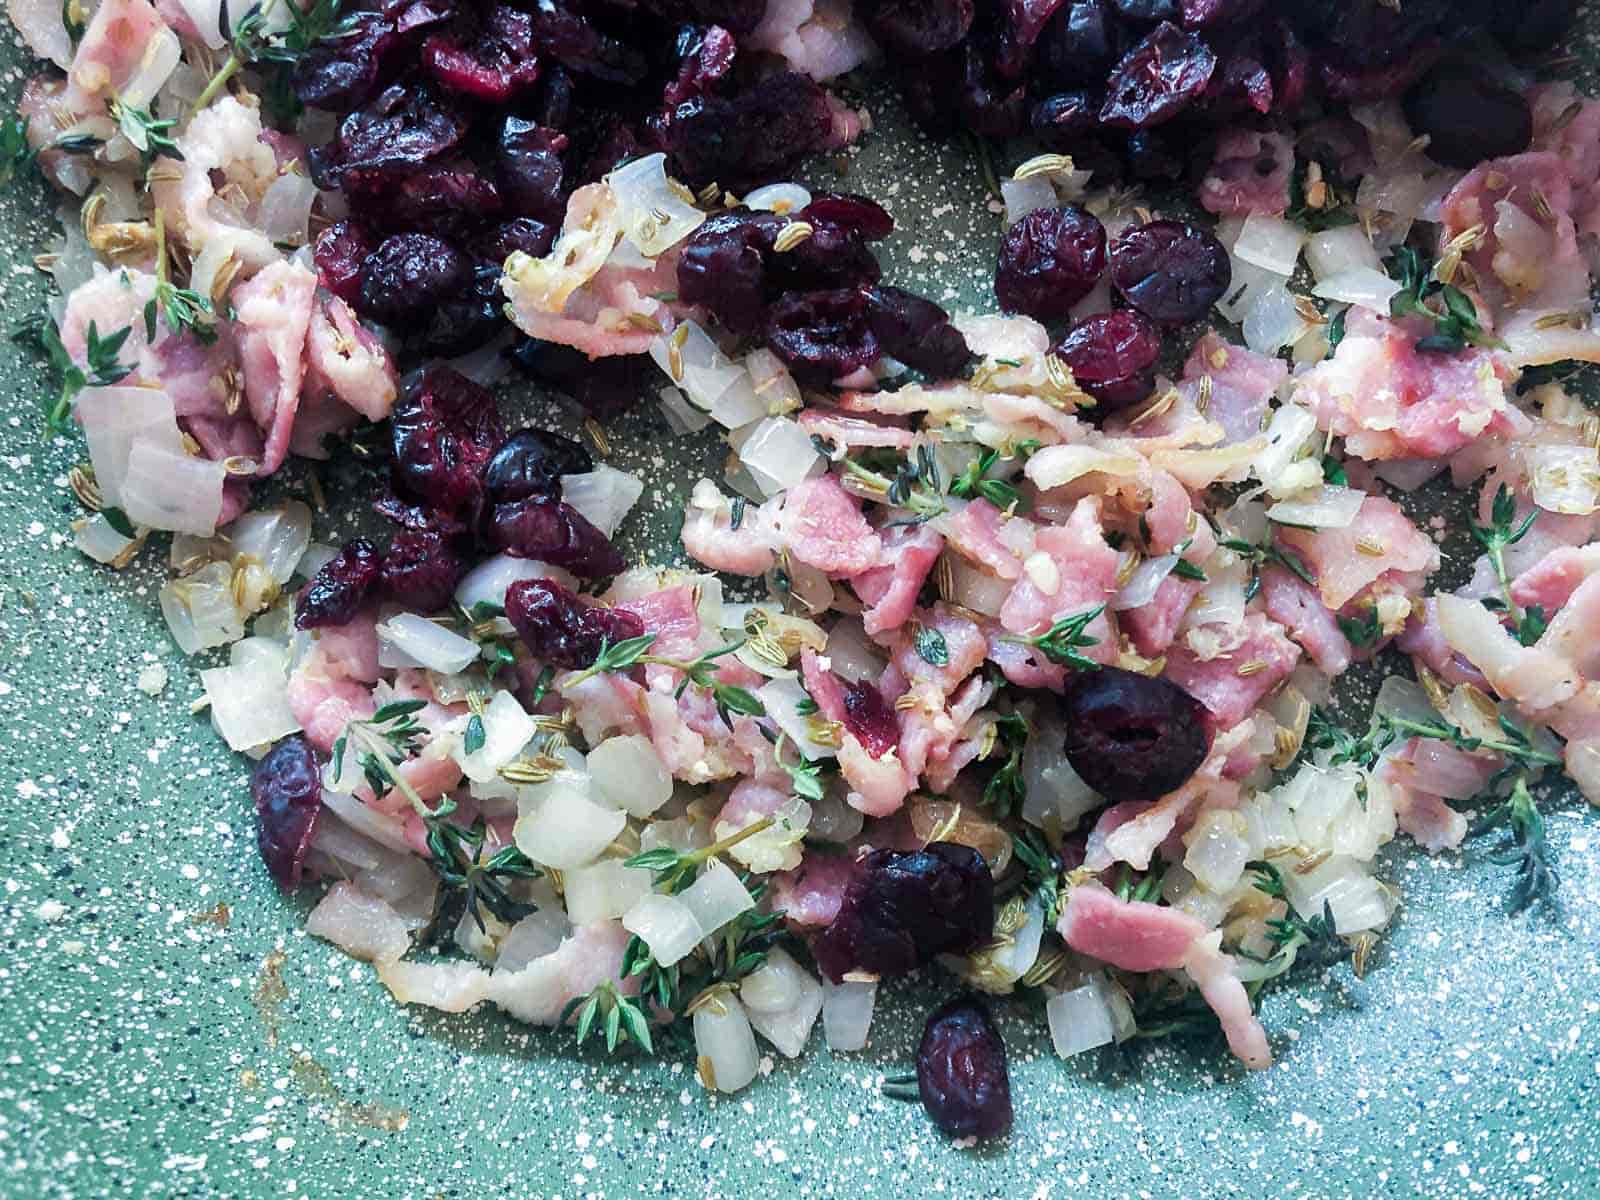 Shallots, dried cranberries and herbs and spices to make a stuffing.